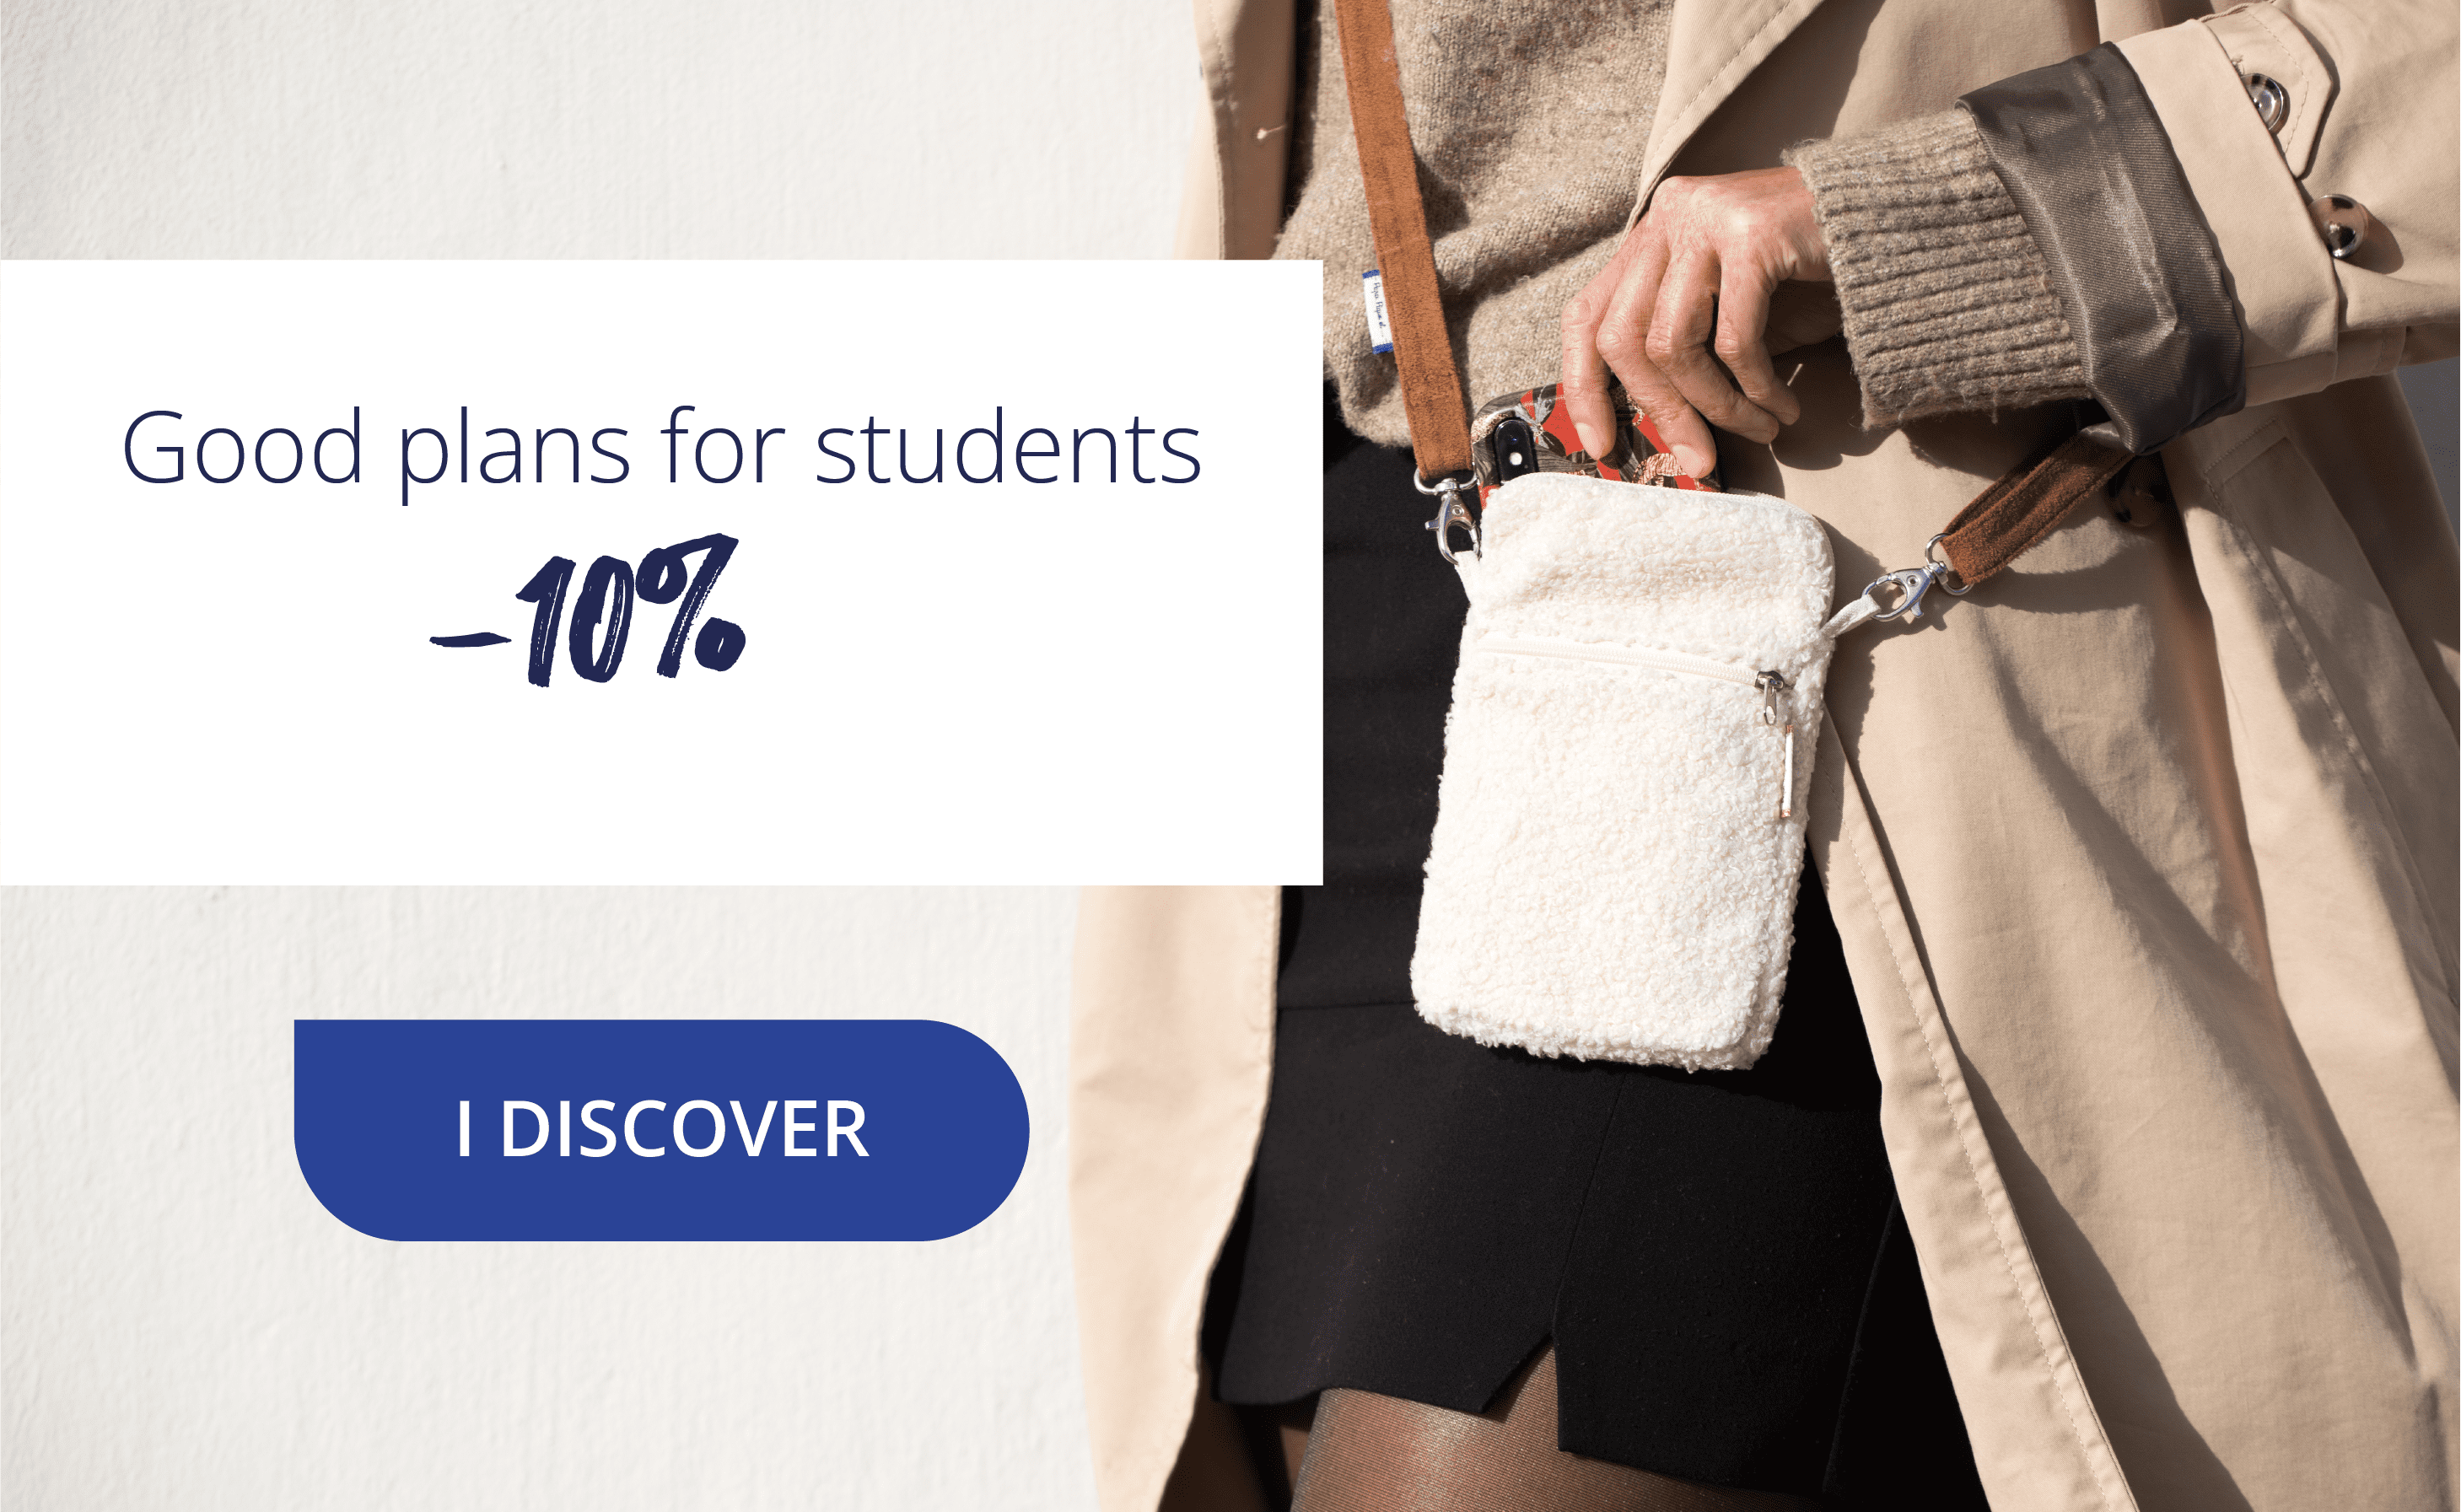 Student discount - 10% in our shops